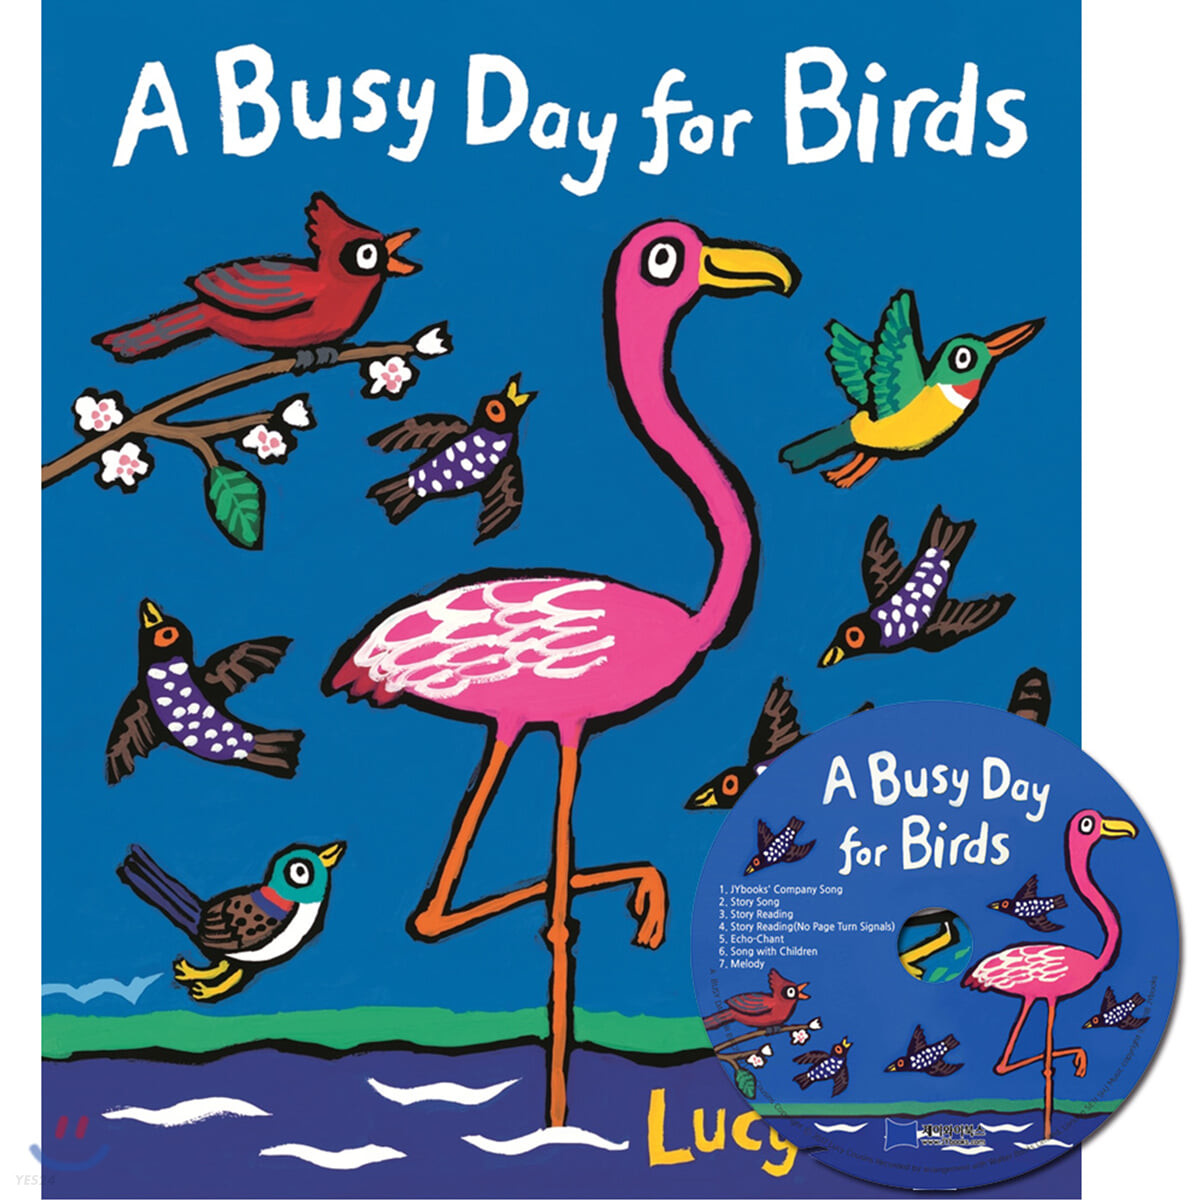 (A)Busy day for birds